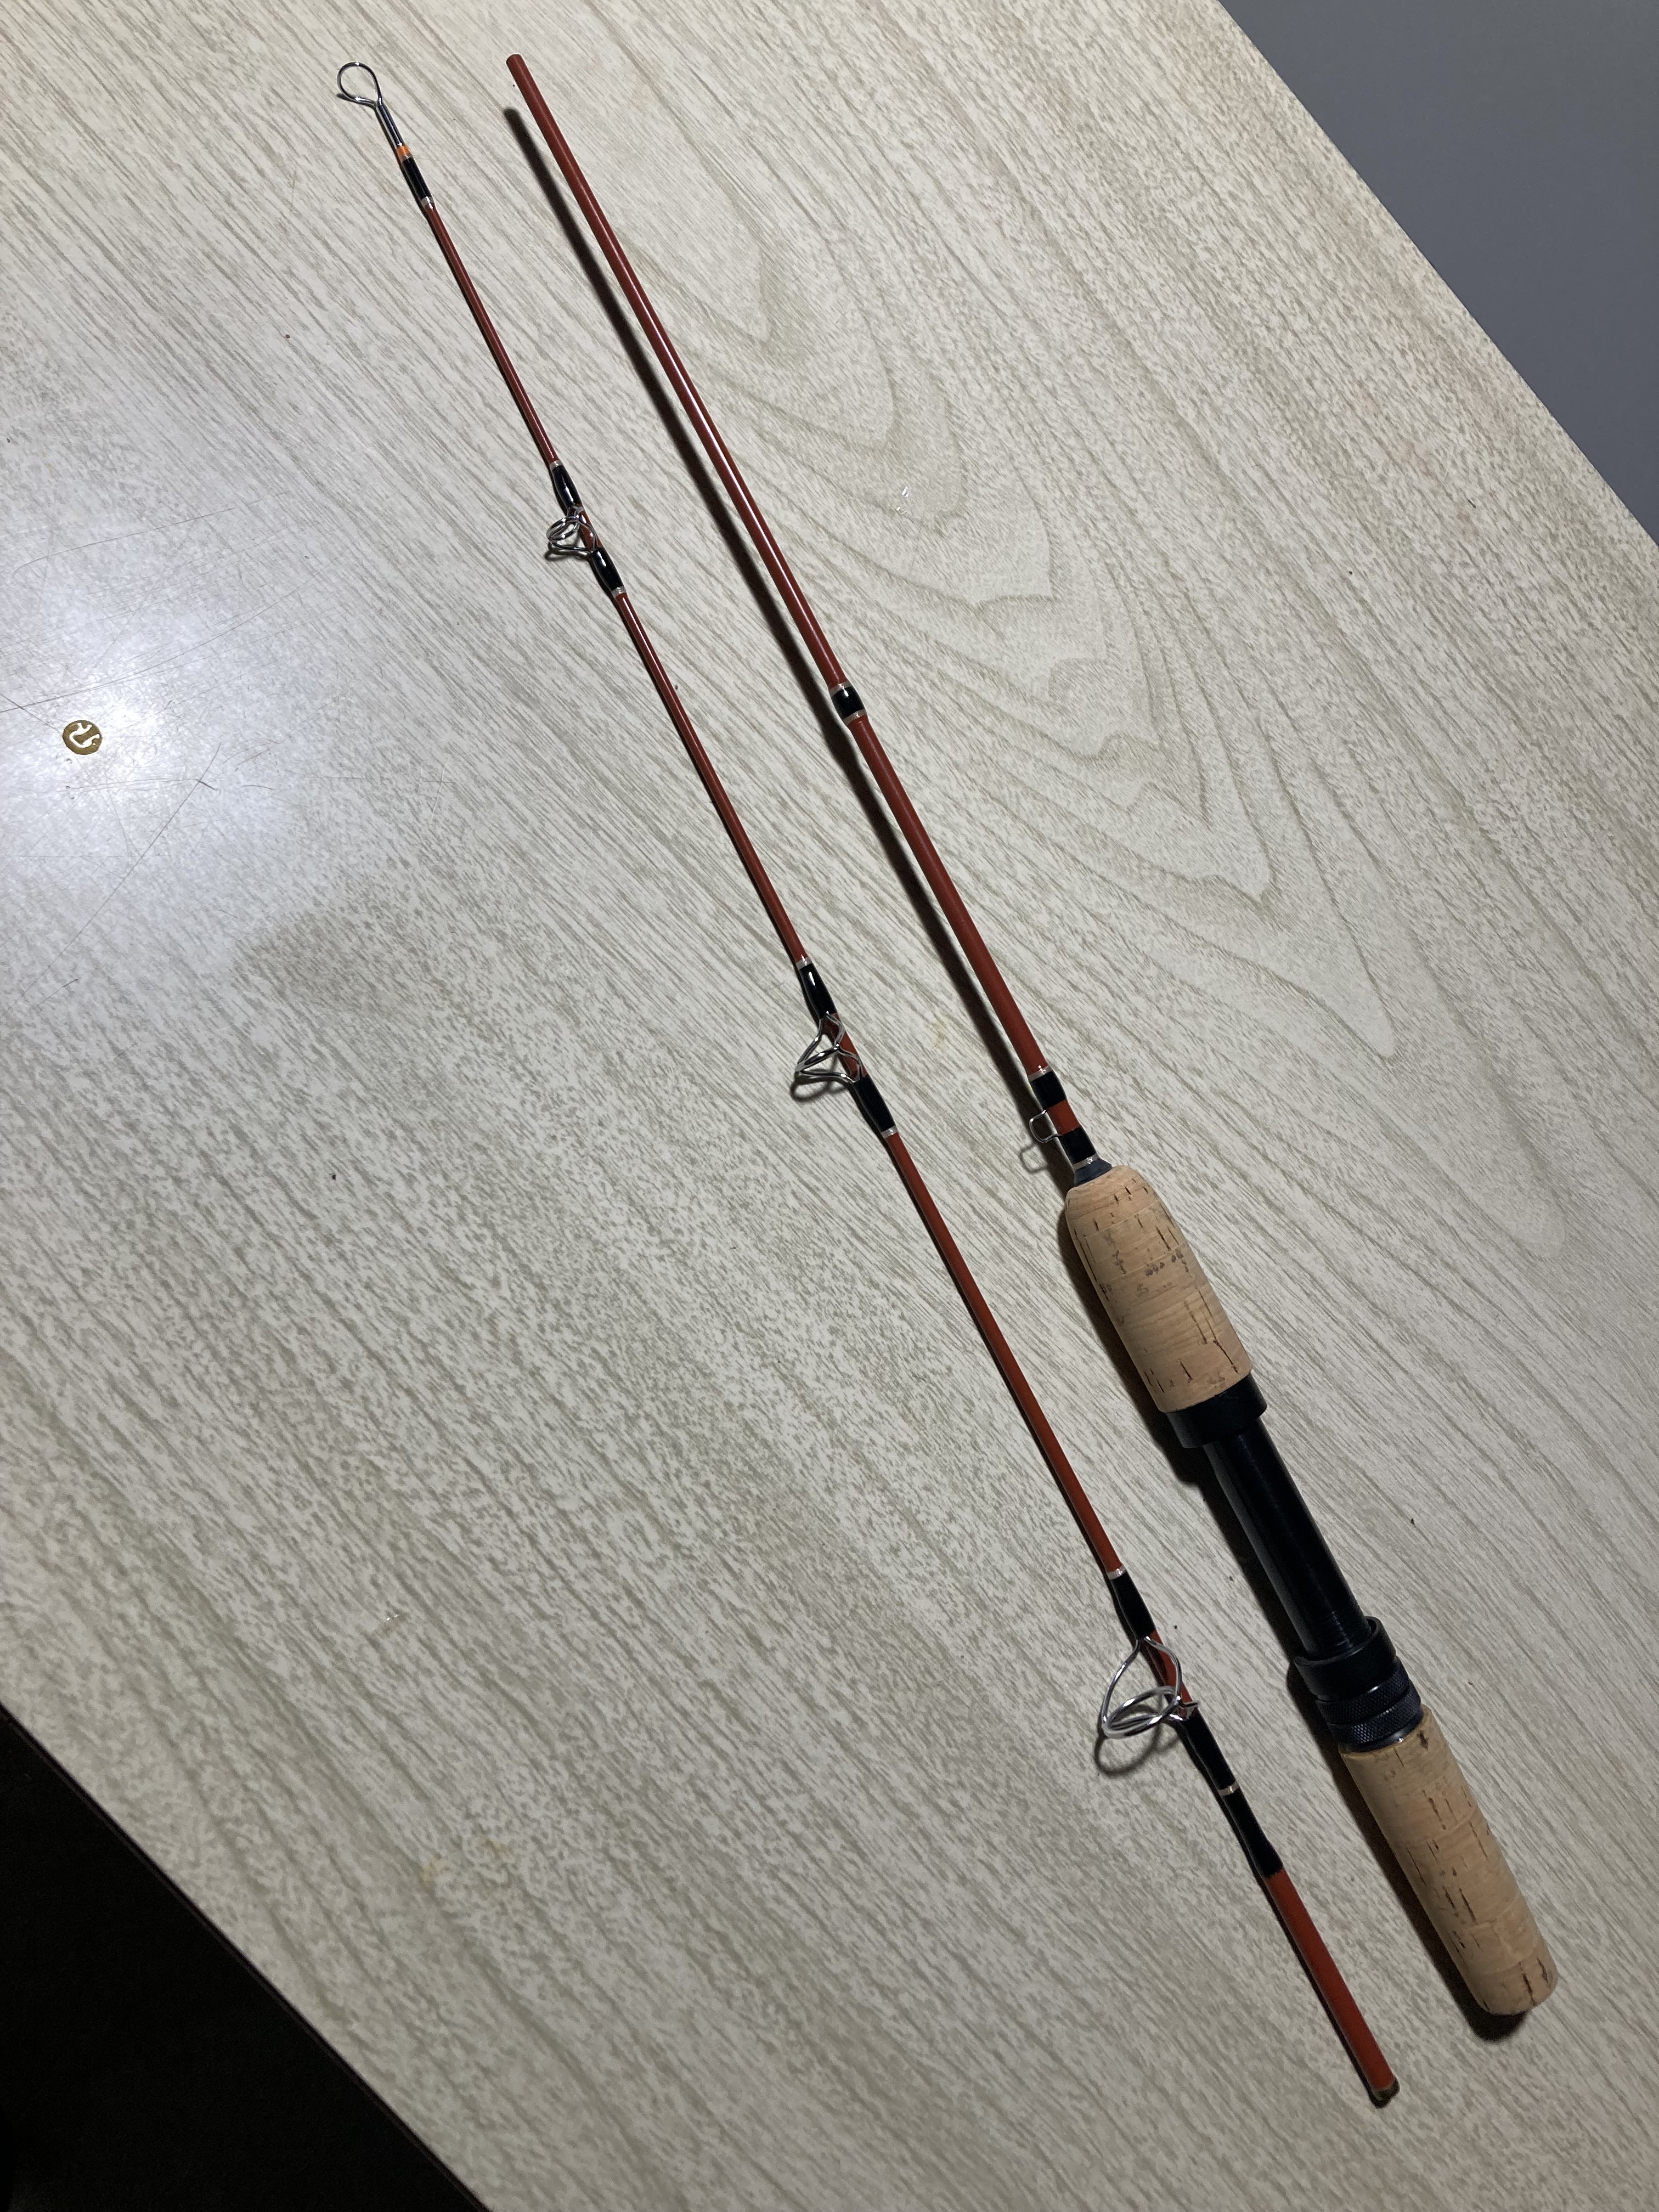 Phillipson Ice Rod build, Rod Building and Tackle Tinkering